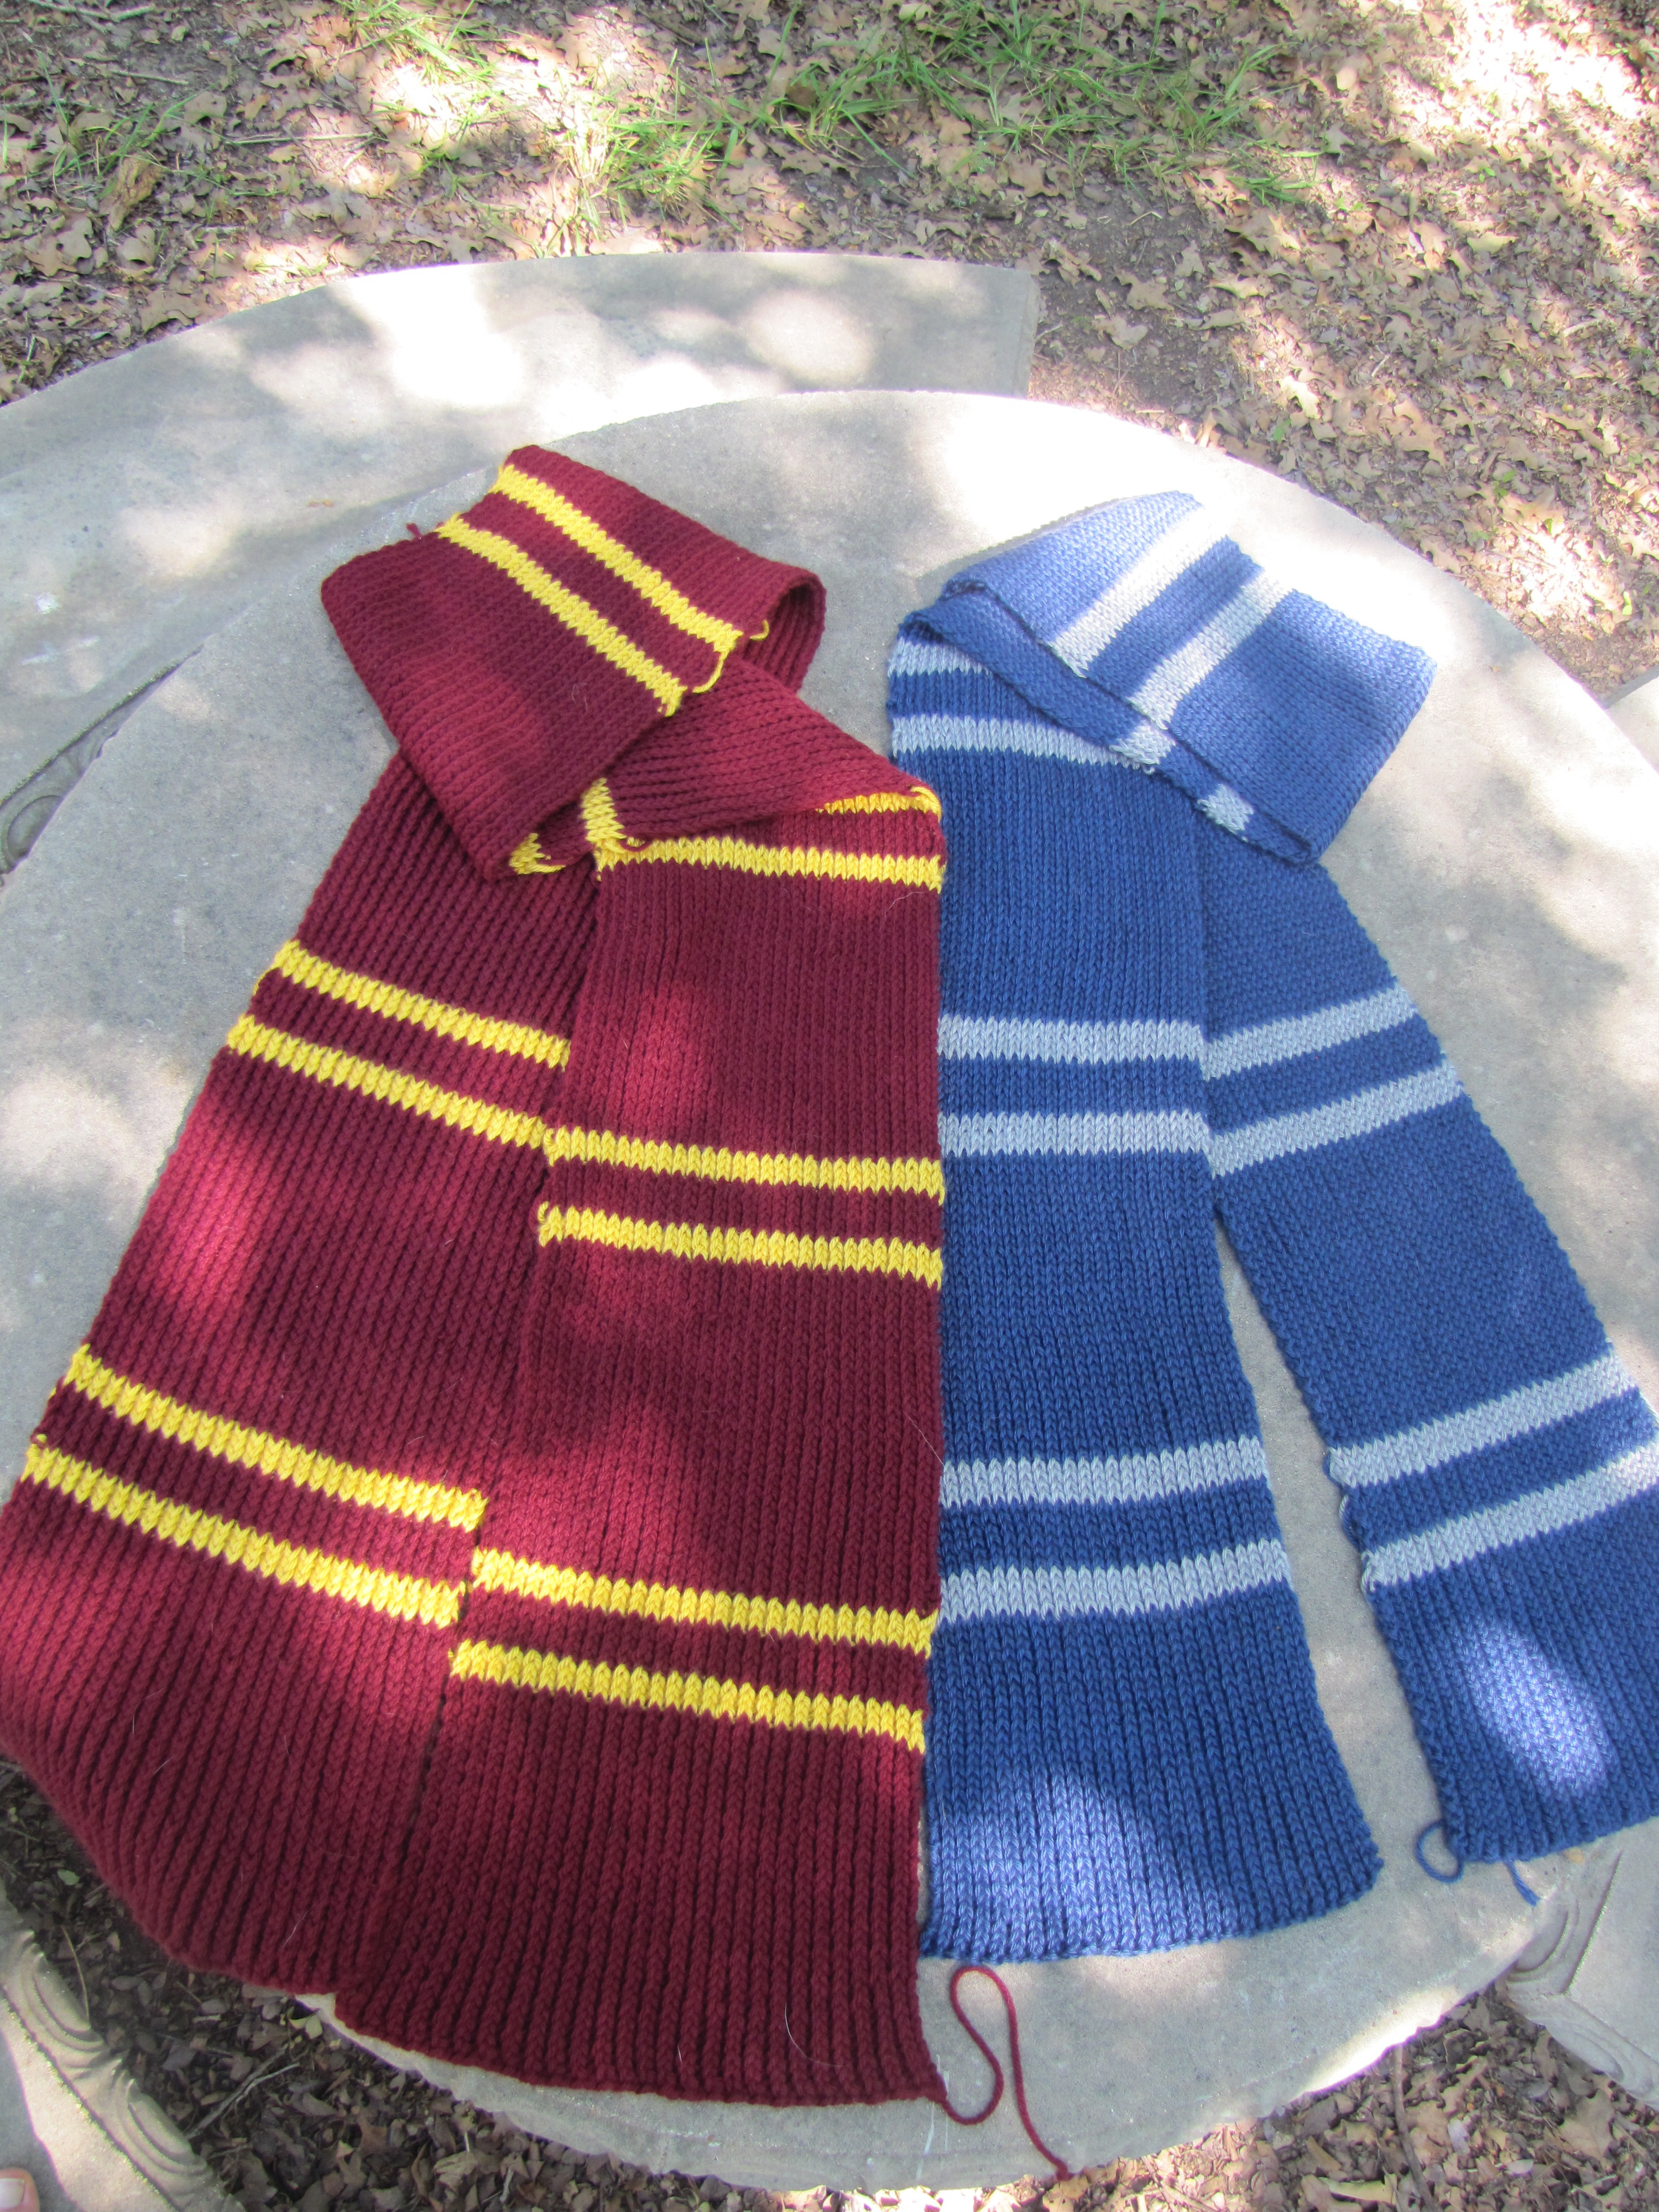 Hogwarts House Scarf Knitting Pattern Hogwarts Knit Scarf Pattern Mk Ii The Come And Go Room